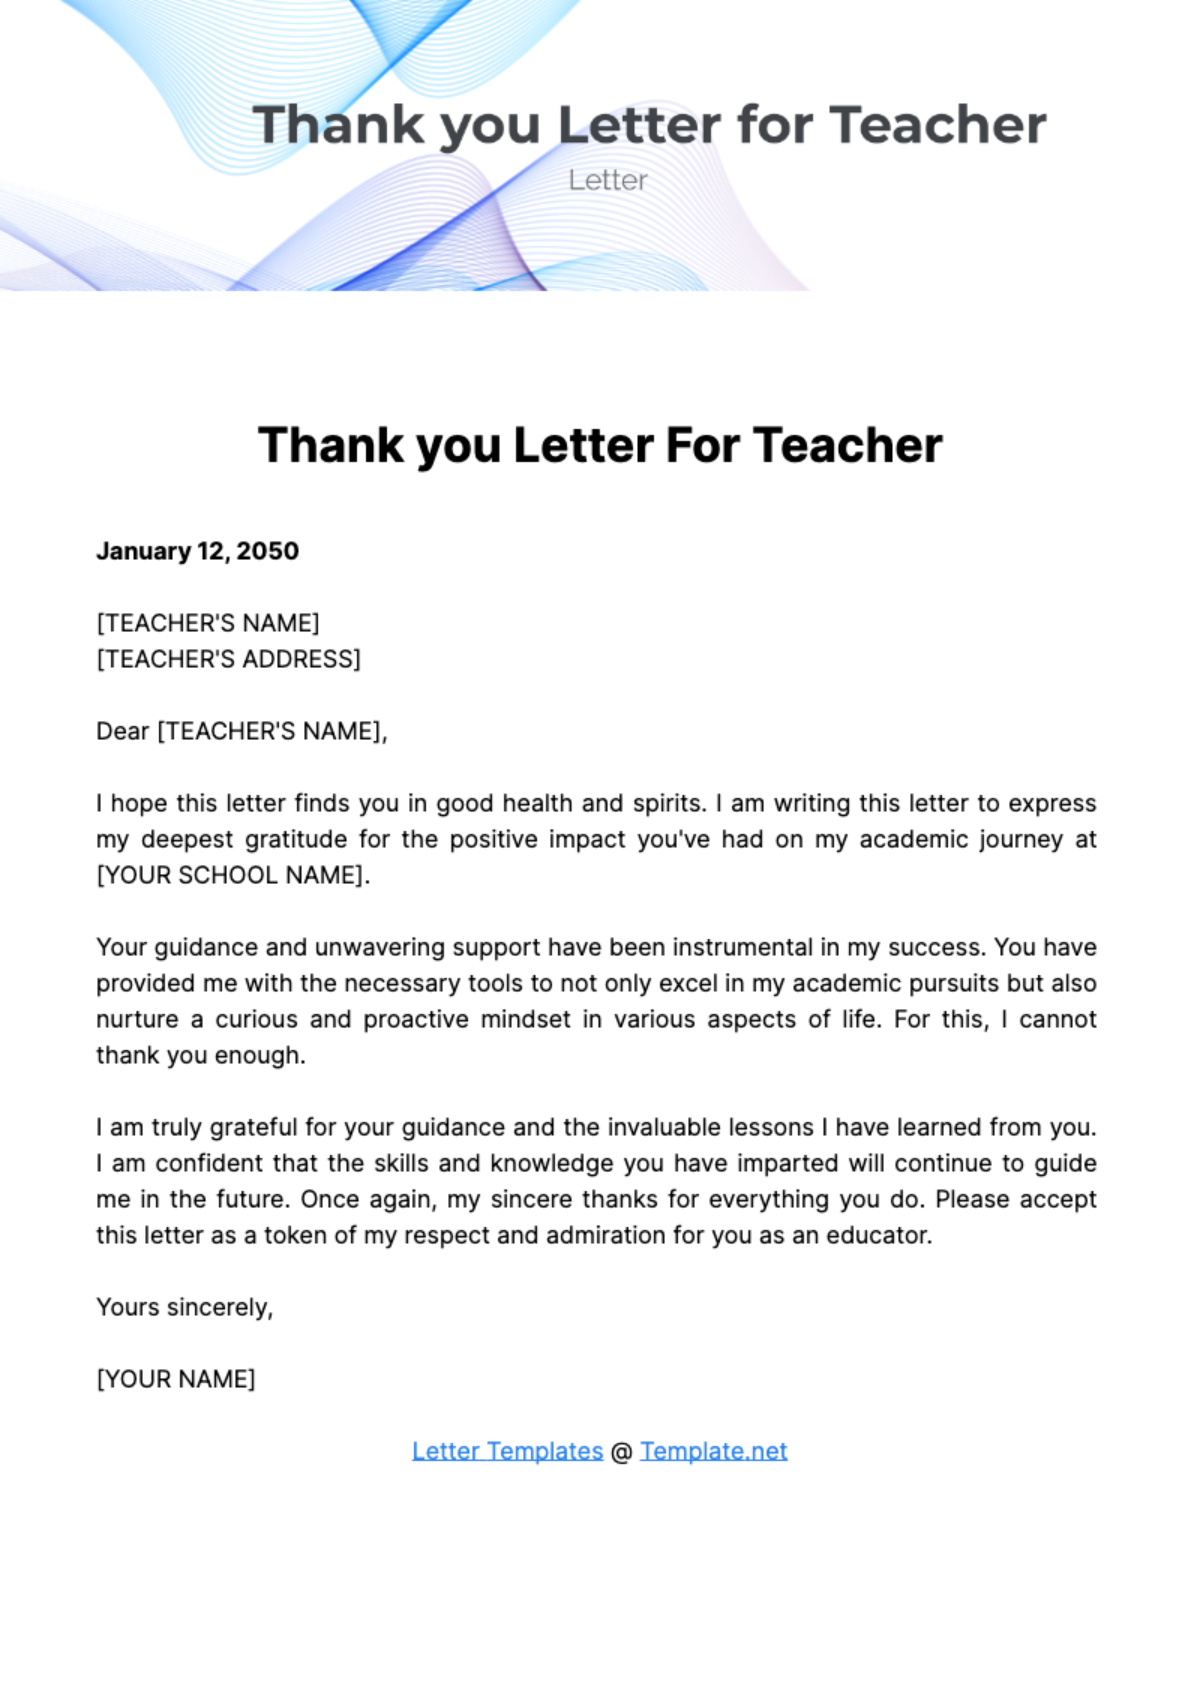 Thank you Letter for Teacher Template